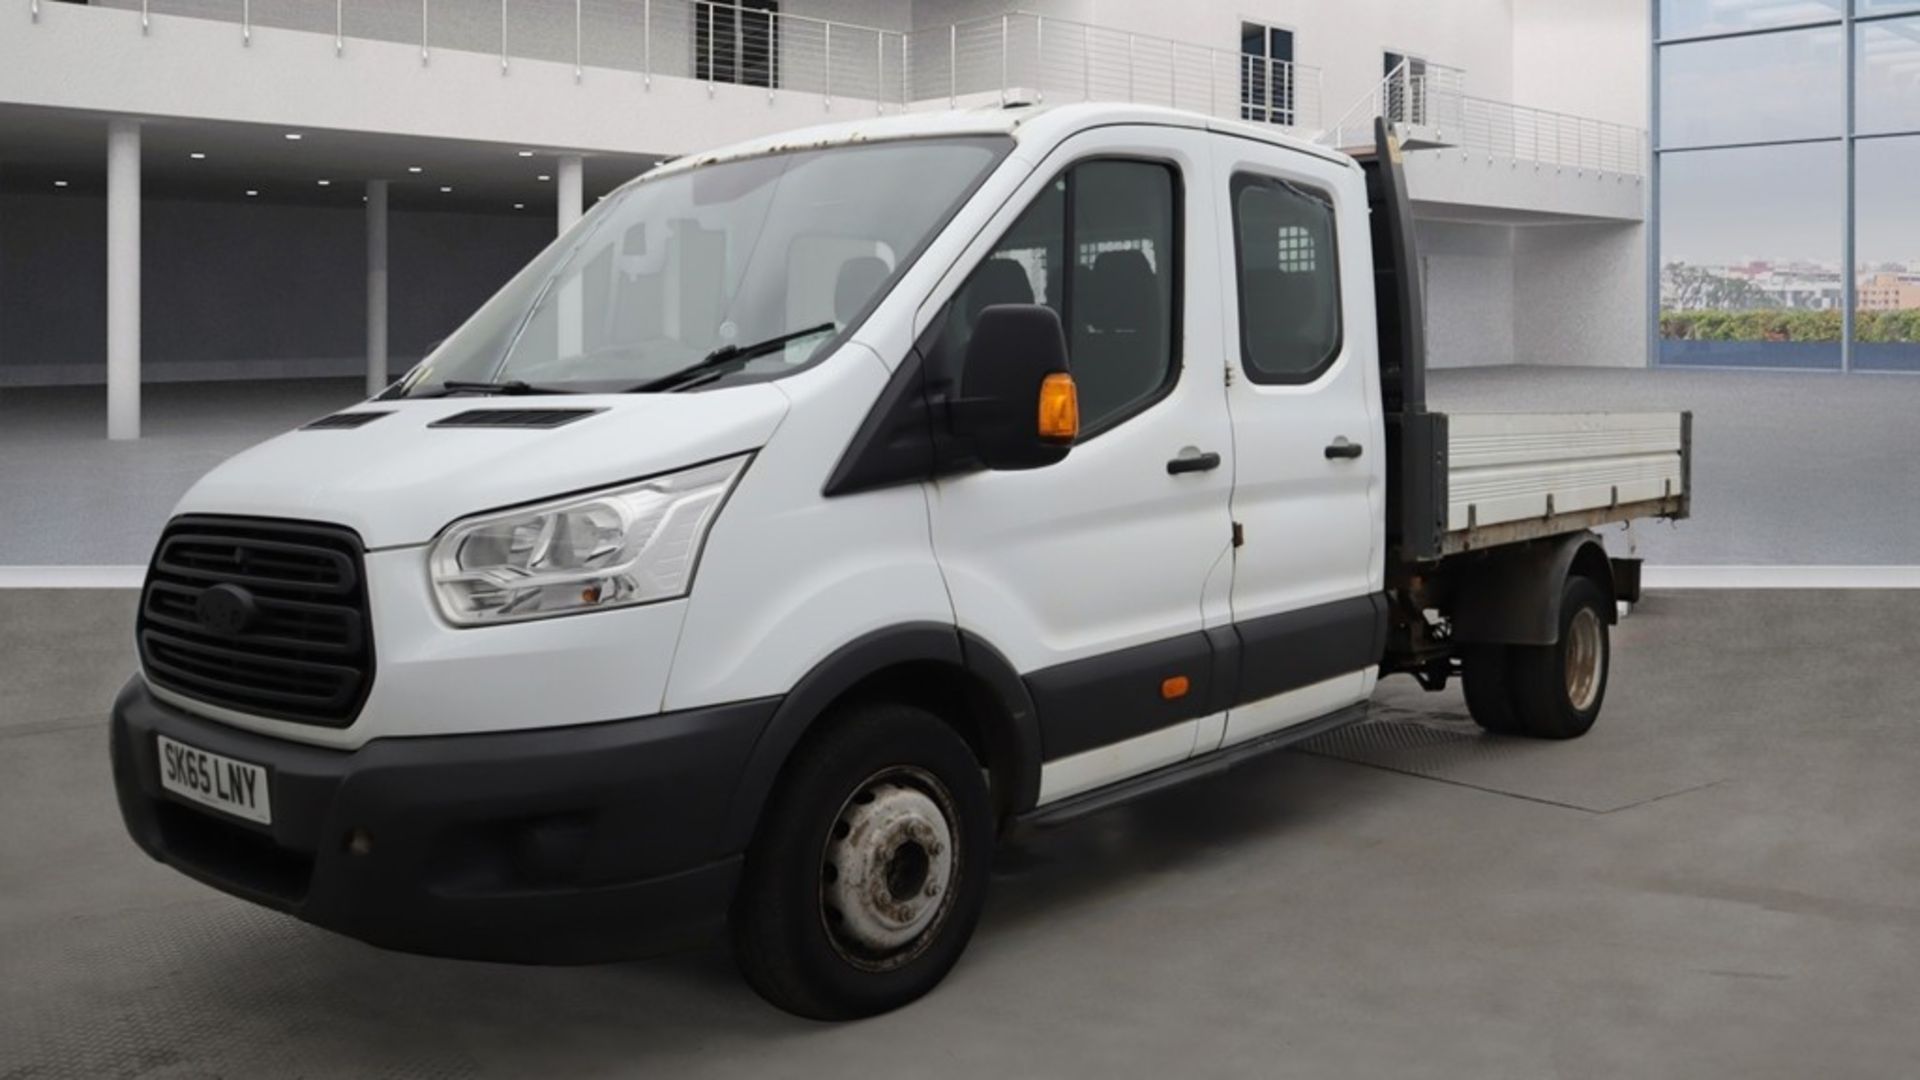 ** ON SALE ** Ford transit 2.2 TDCI 125 RWD L3 Double Cab Tipper 2015 '65 Reg' - Twin Axle - Image 2 of 9